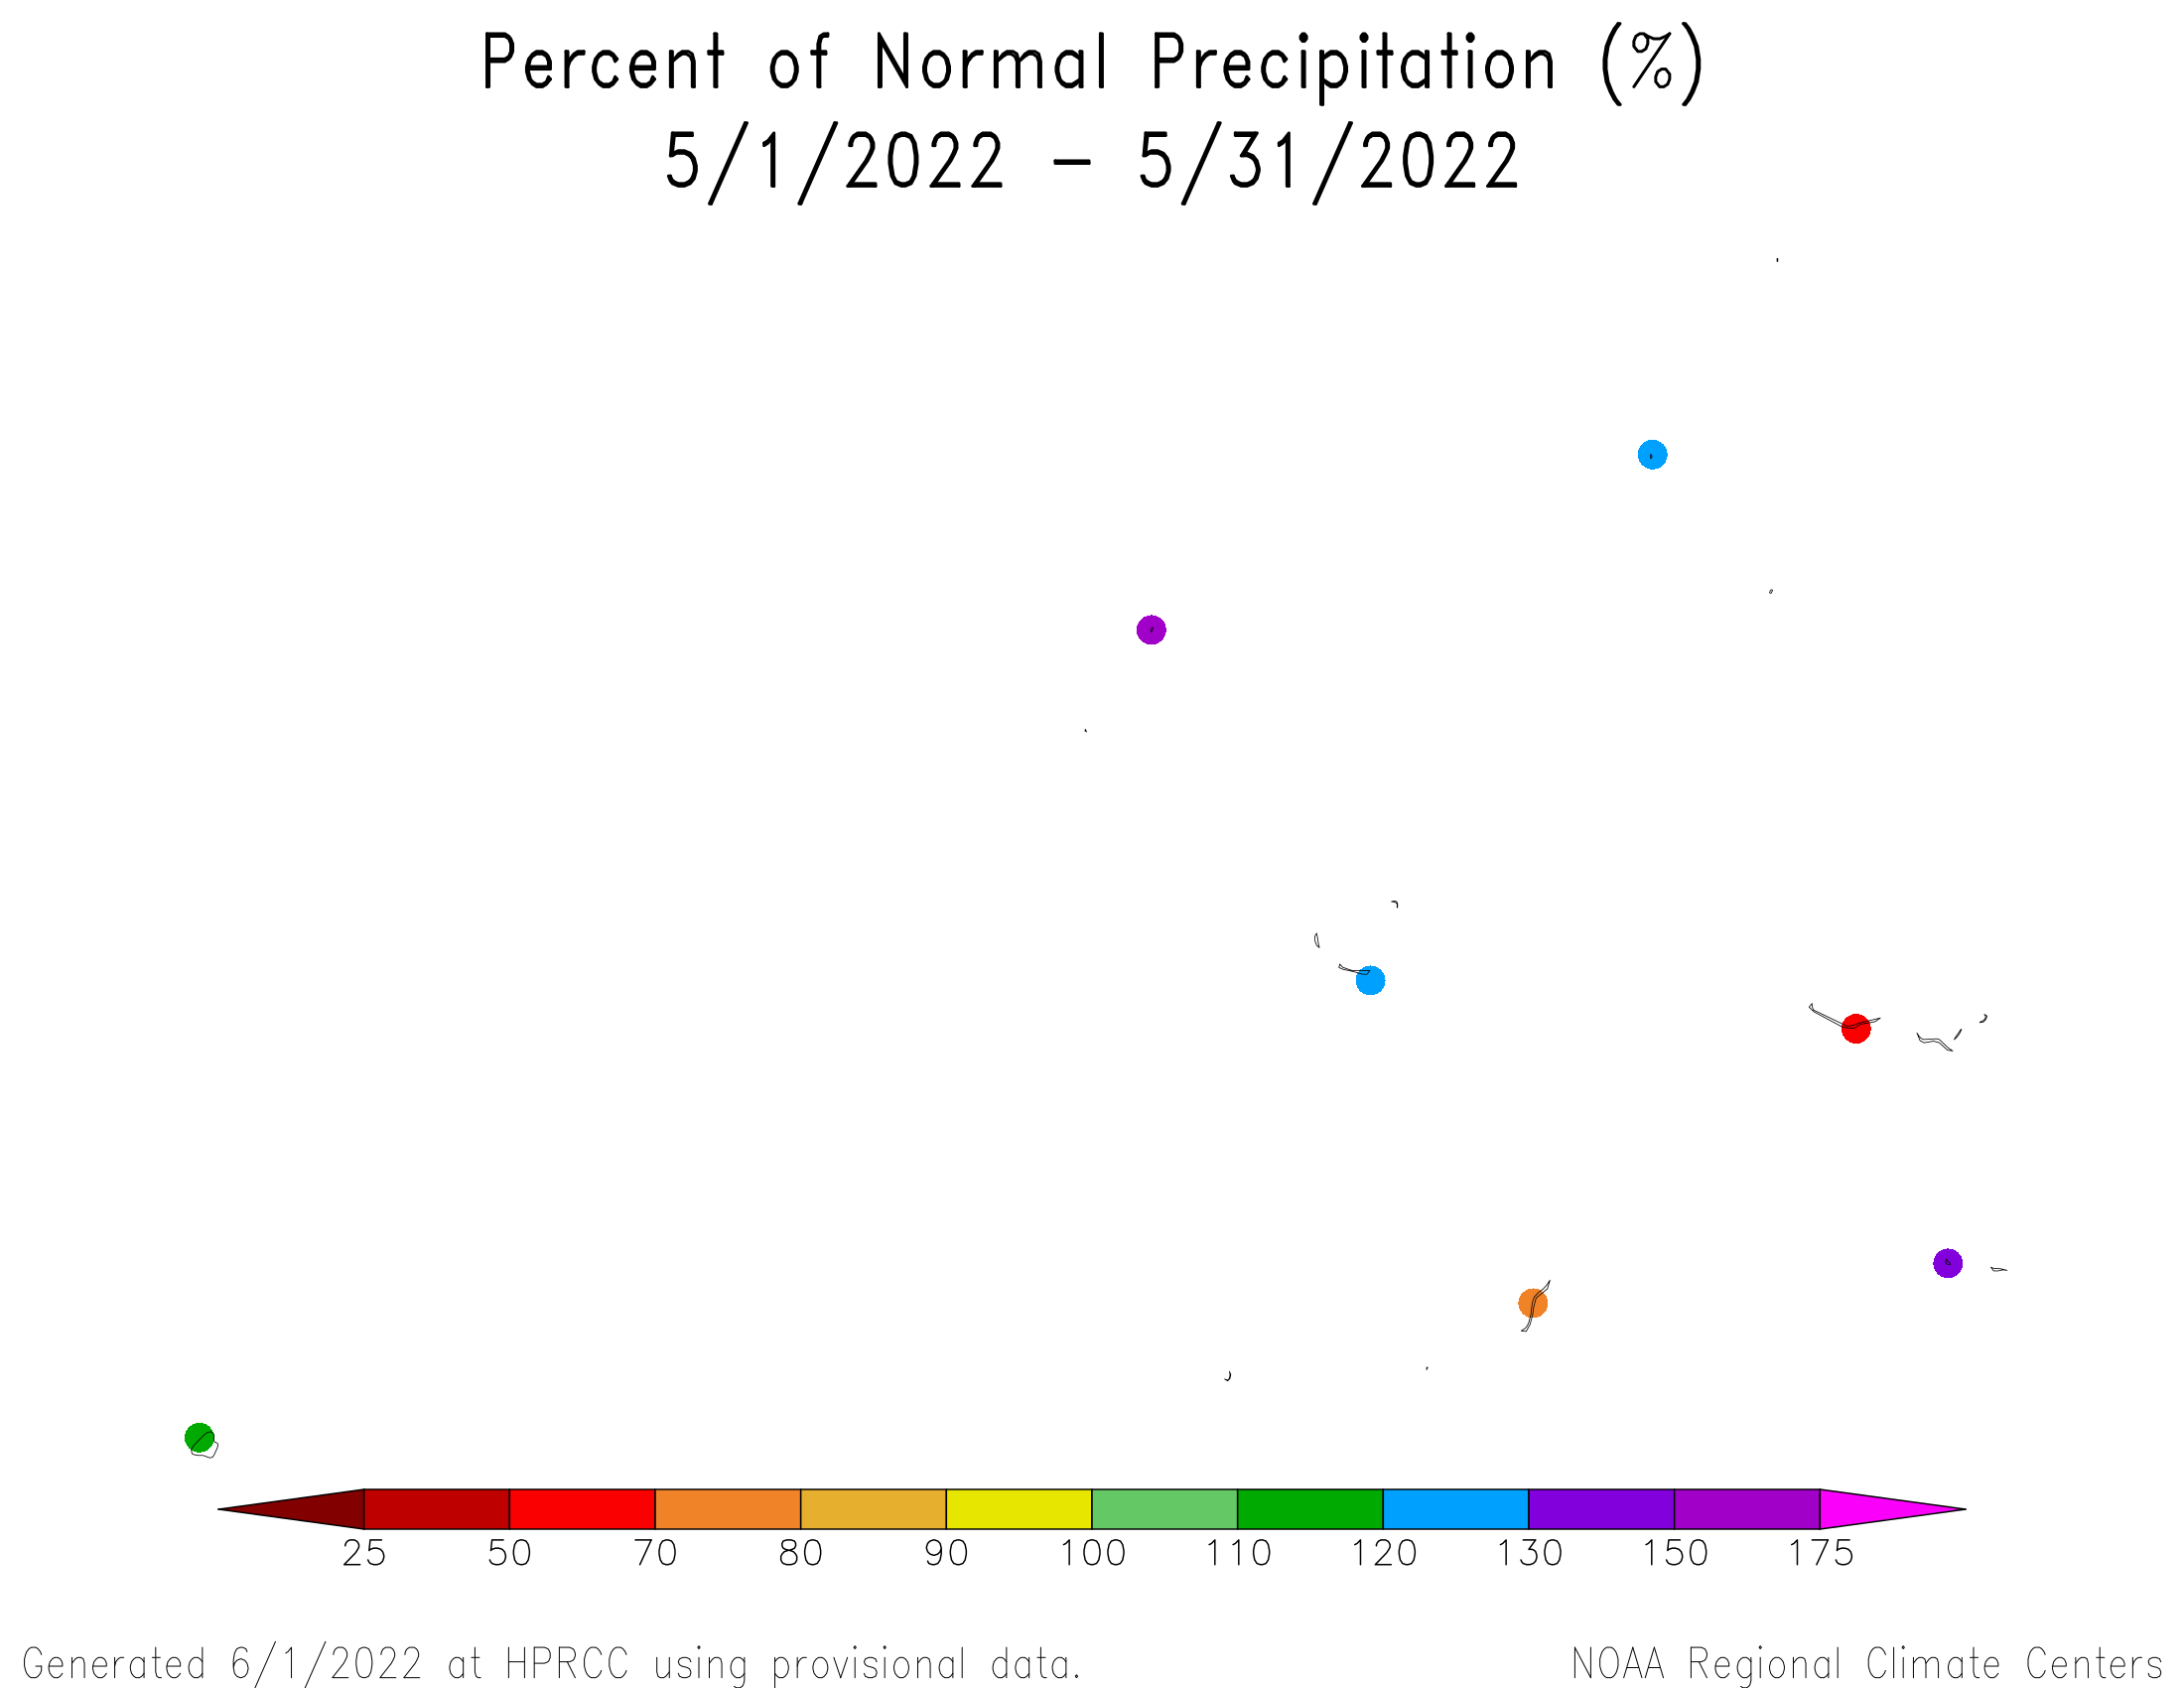 1-month Percent of Normal Precipitation for the Marshall Islands